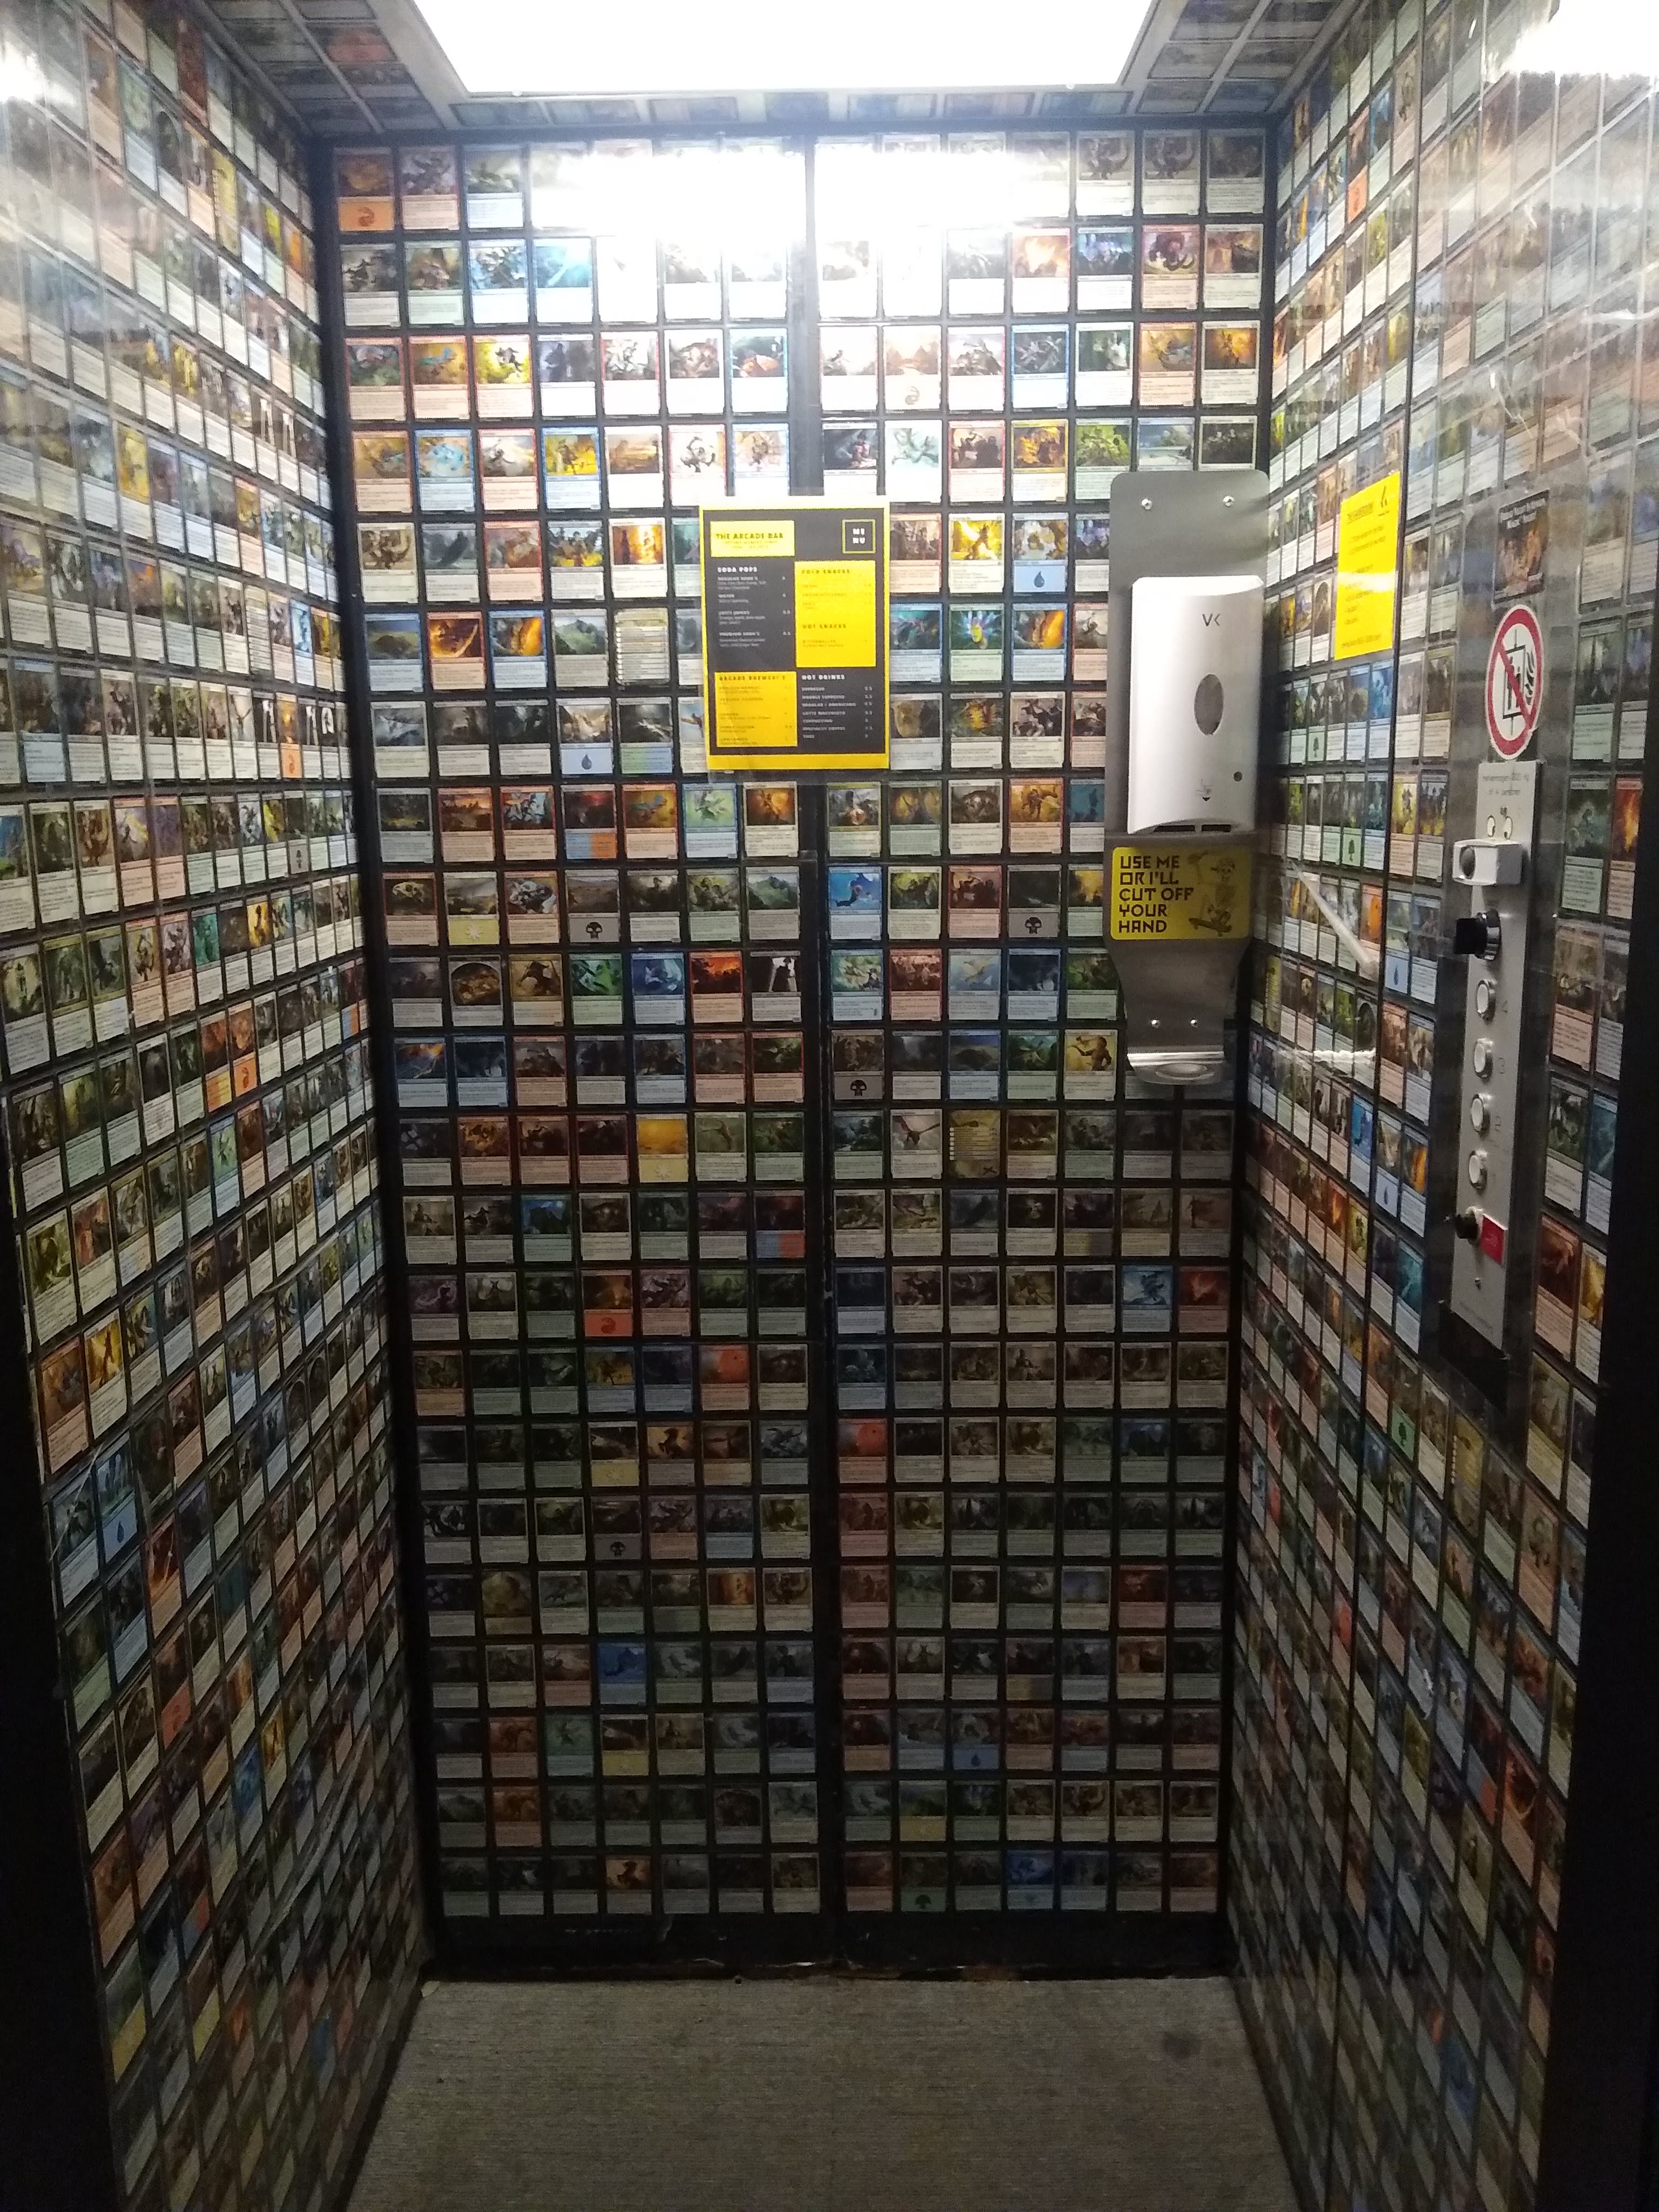 A photograph of the inside of a lift that is covered in Magic: The Gathering playing cards. The lift buttons are on the right. A white hand sanitiser dispenser is on the front wall. Some yellow signs featuring instructions for hand cleaning and a menu are placed on the walls.